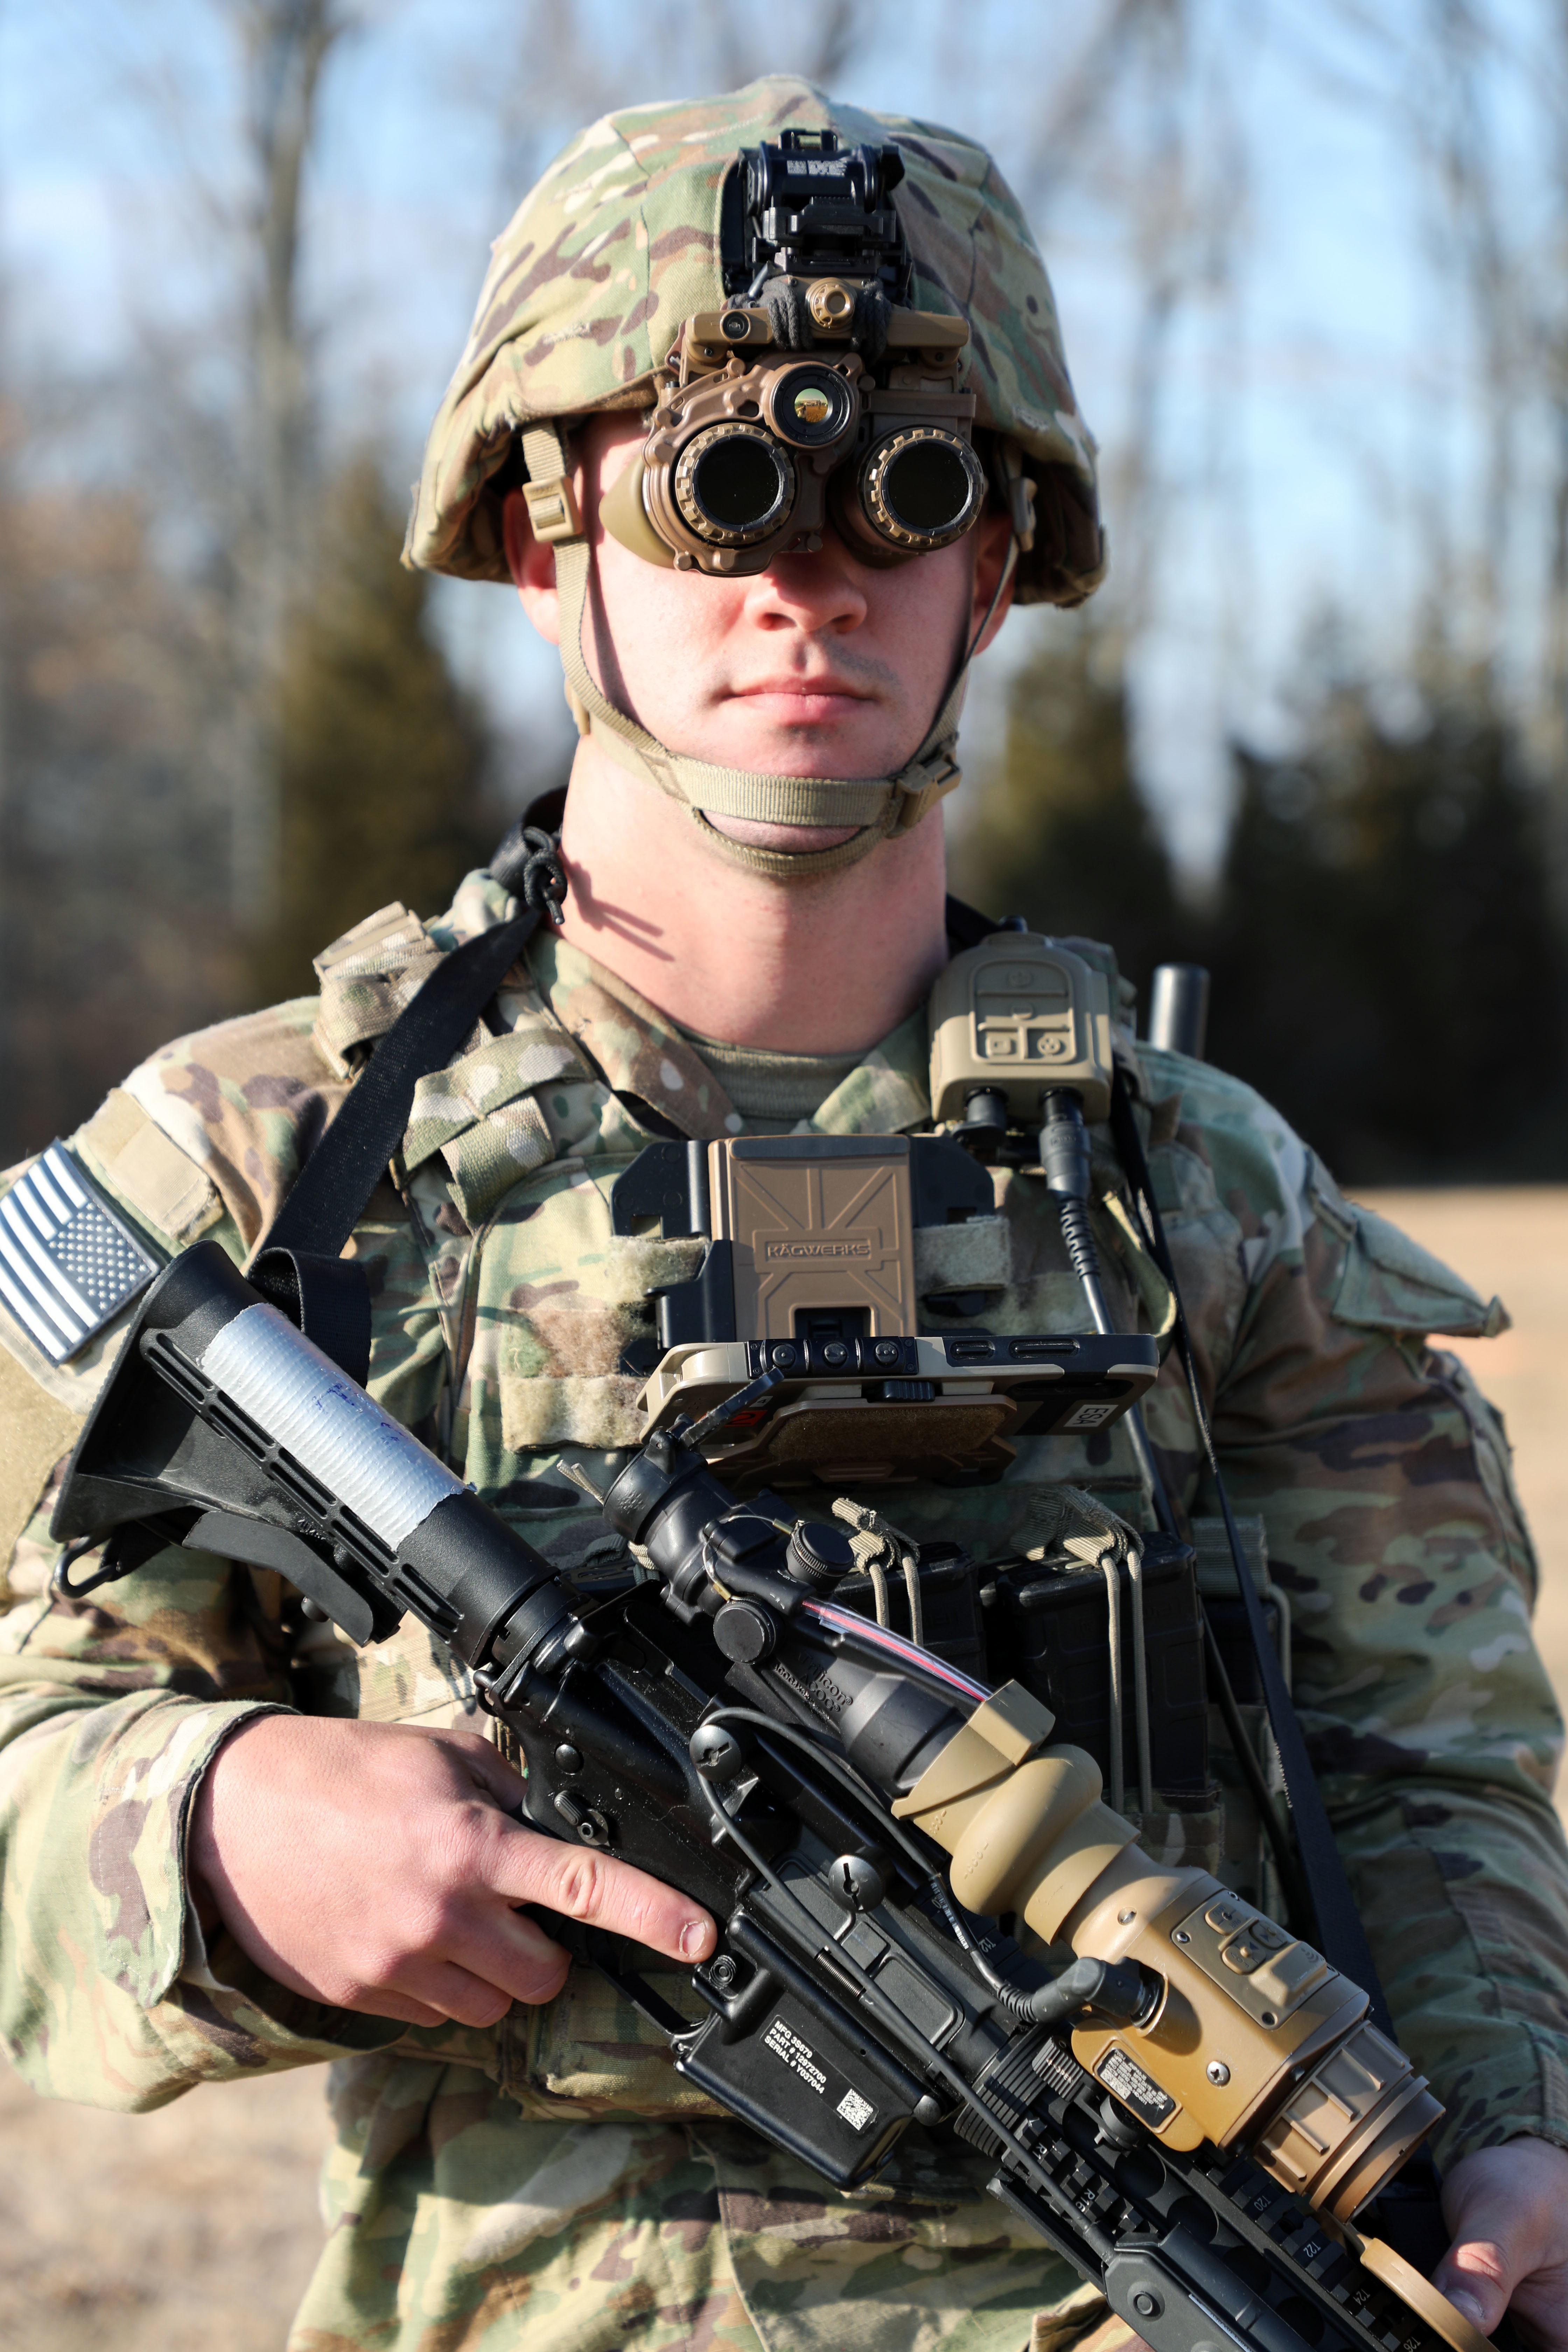 Military Night Vision Goggles  How Do Night Vision Goggles Work?